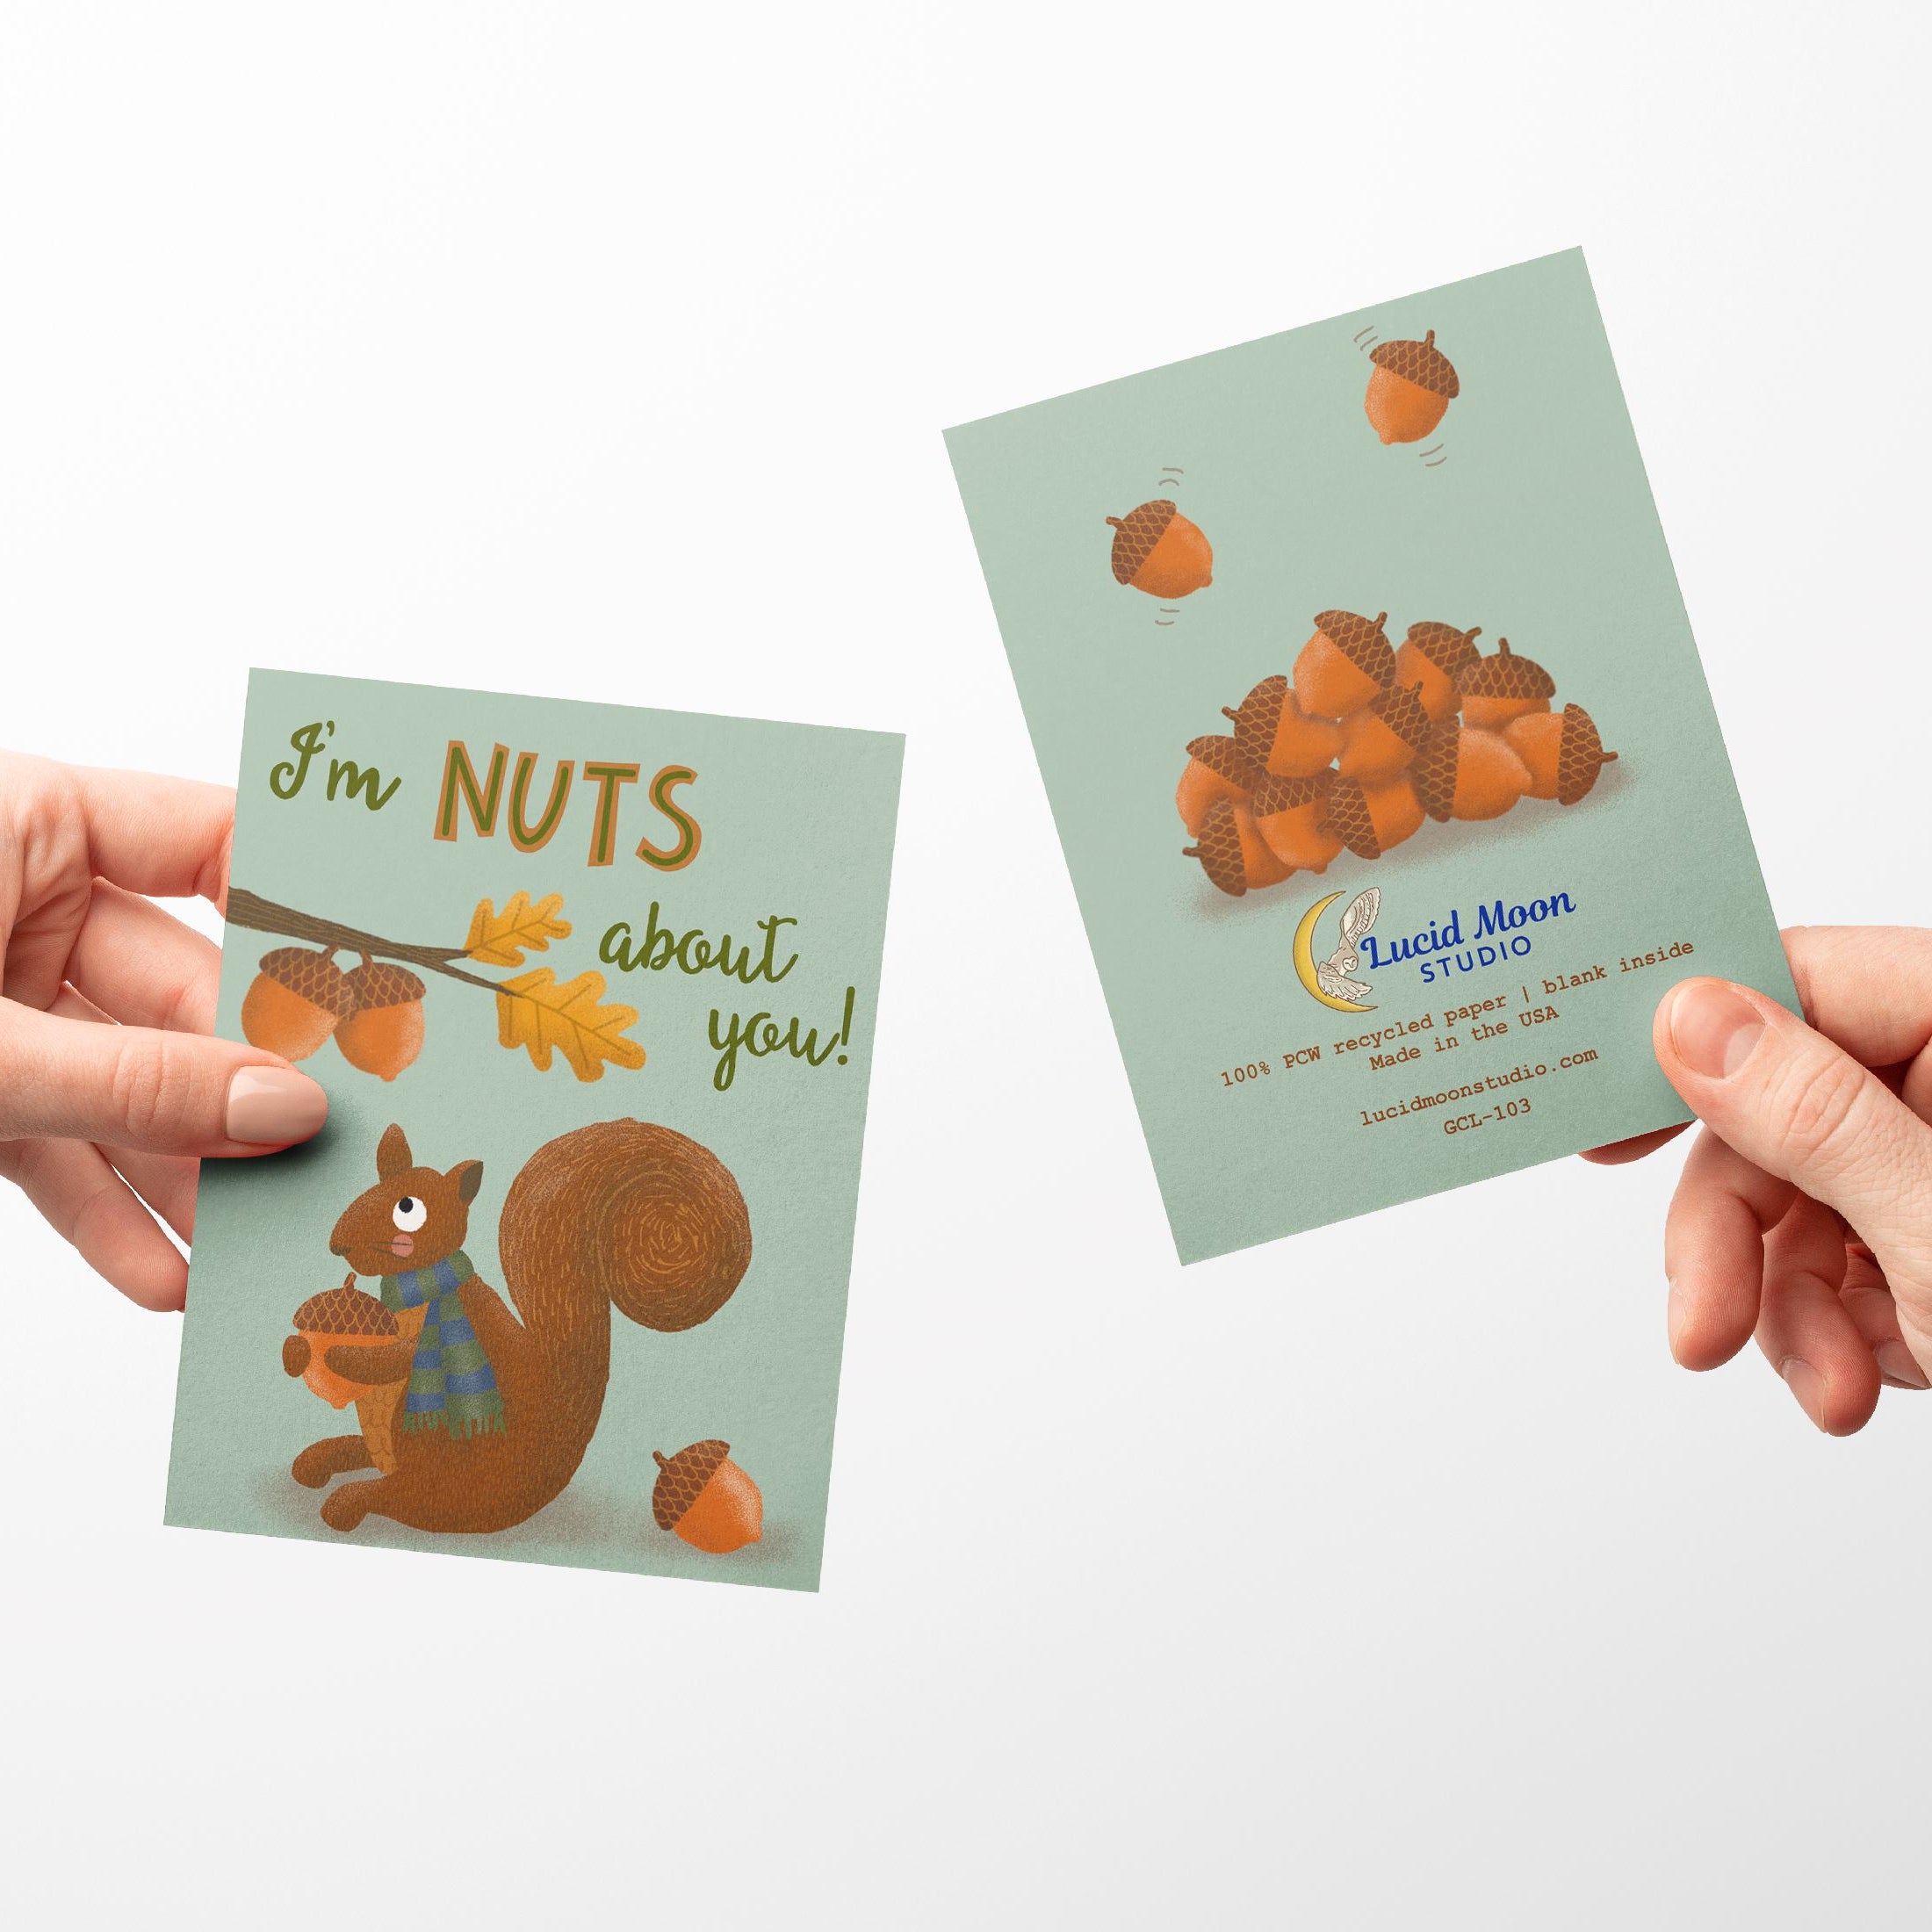 Nuts About You Love Valentine Greeting Card Greeting Cards Lucid Moon Studio 